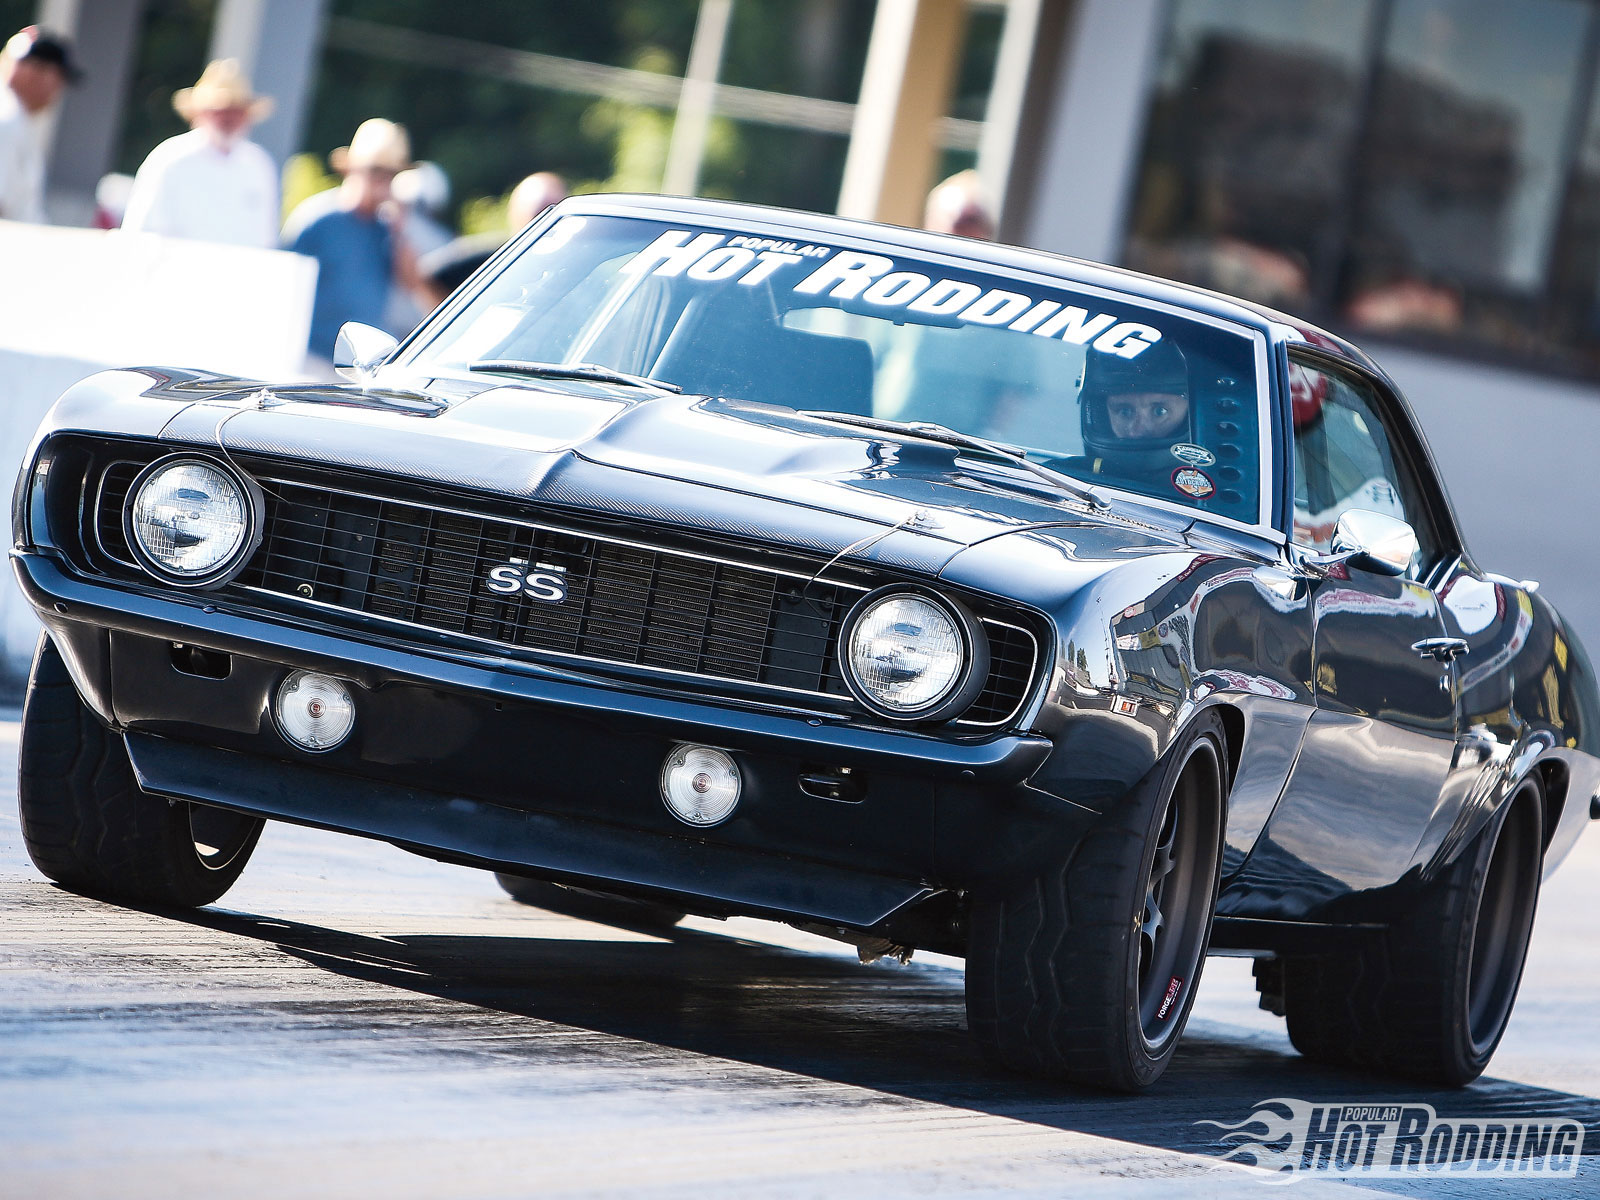 Chevy Camaro Drag Racing Race Car Muscle Hot Rods Wallpaper Background